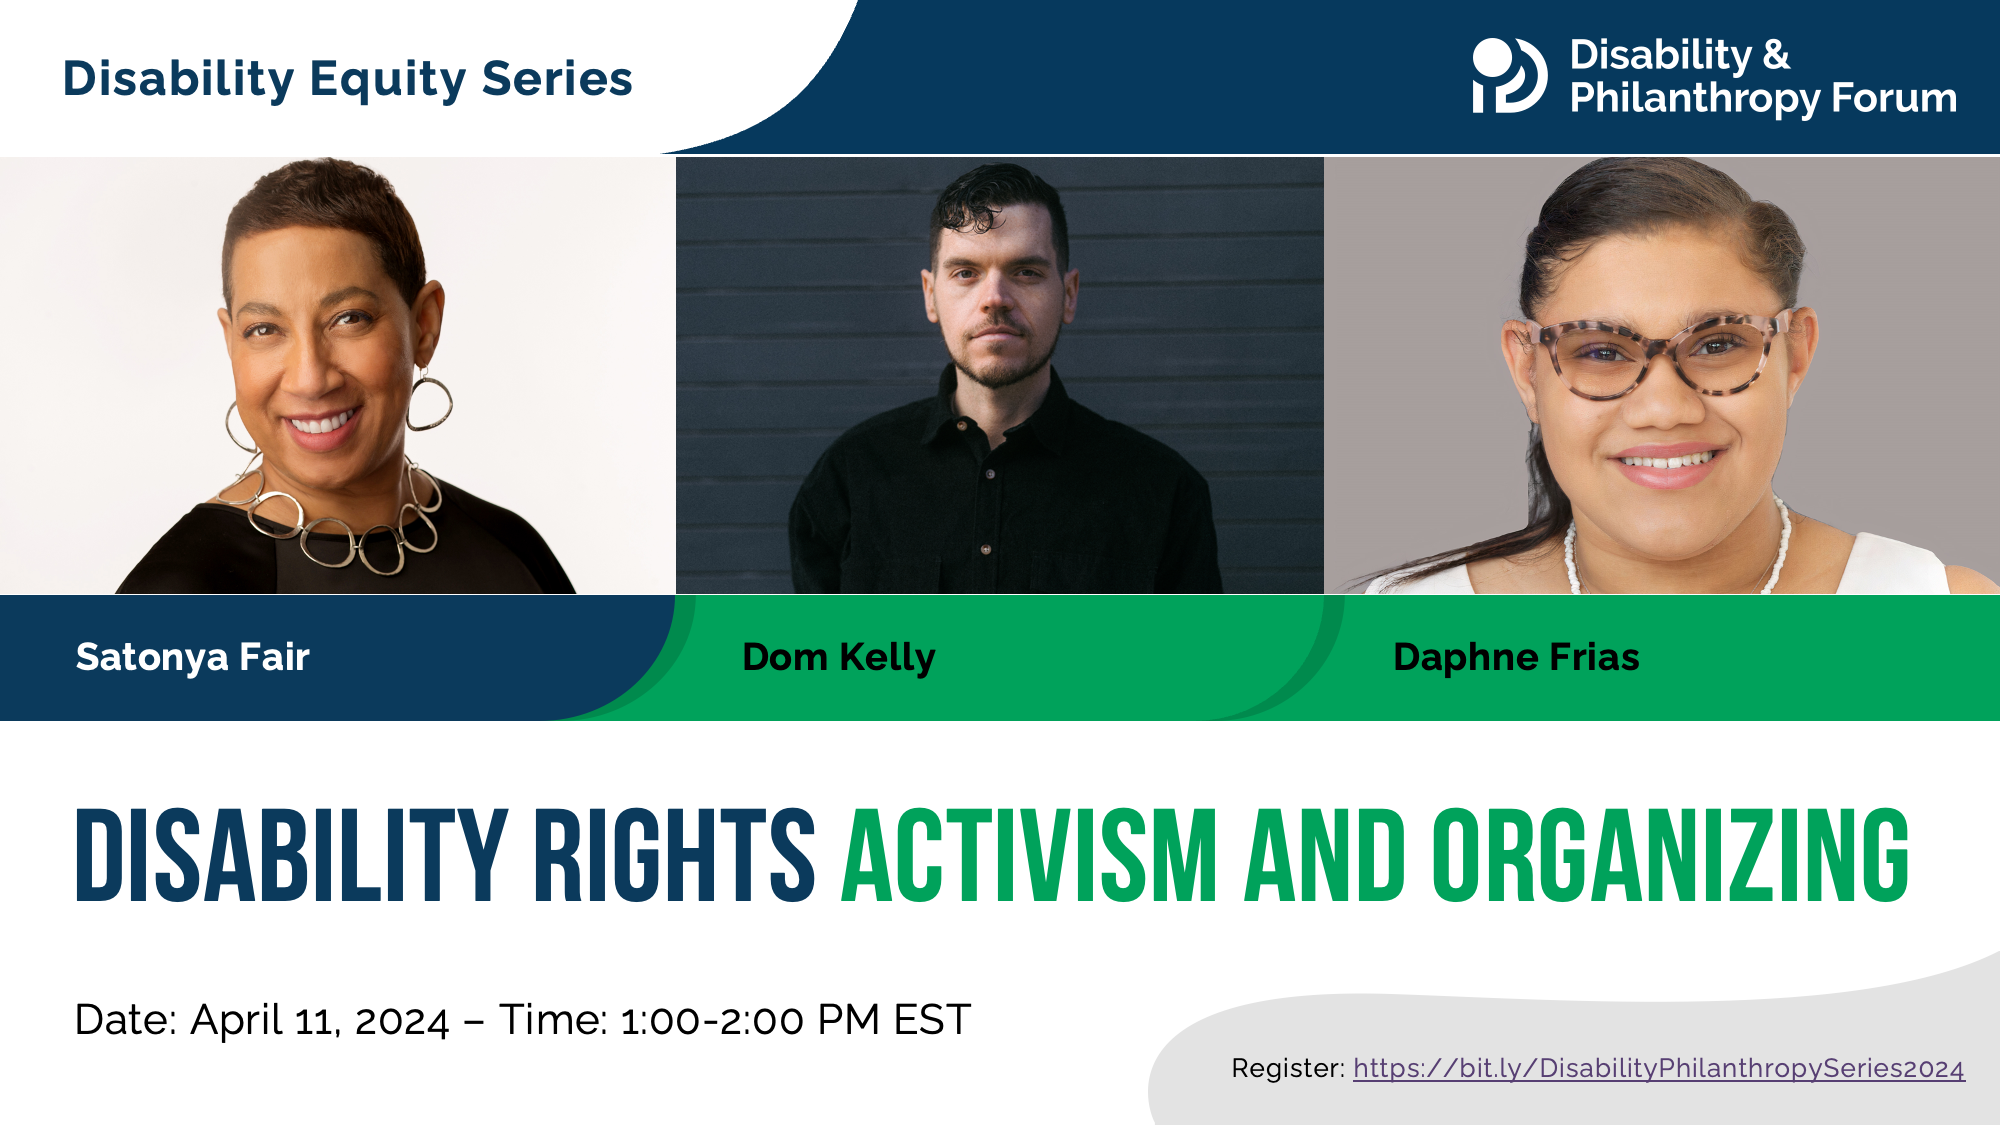 Photos of Disability Rights Activism and Organizing moderator Satonya Fair and panelists Dom Kelly and Daphne Frias. The date of the event is April 11, 2024 at 1:00pm ET.